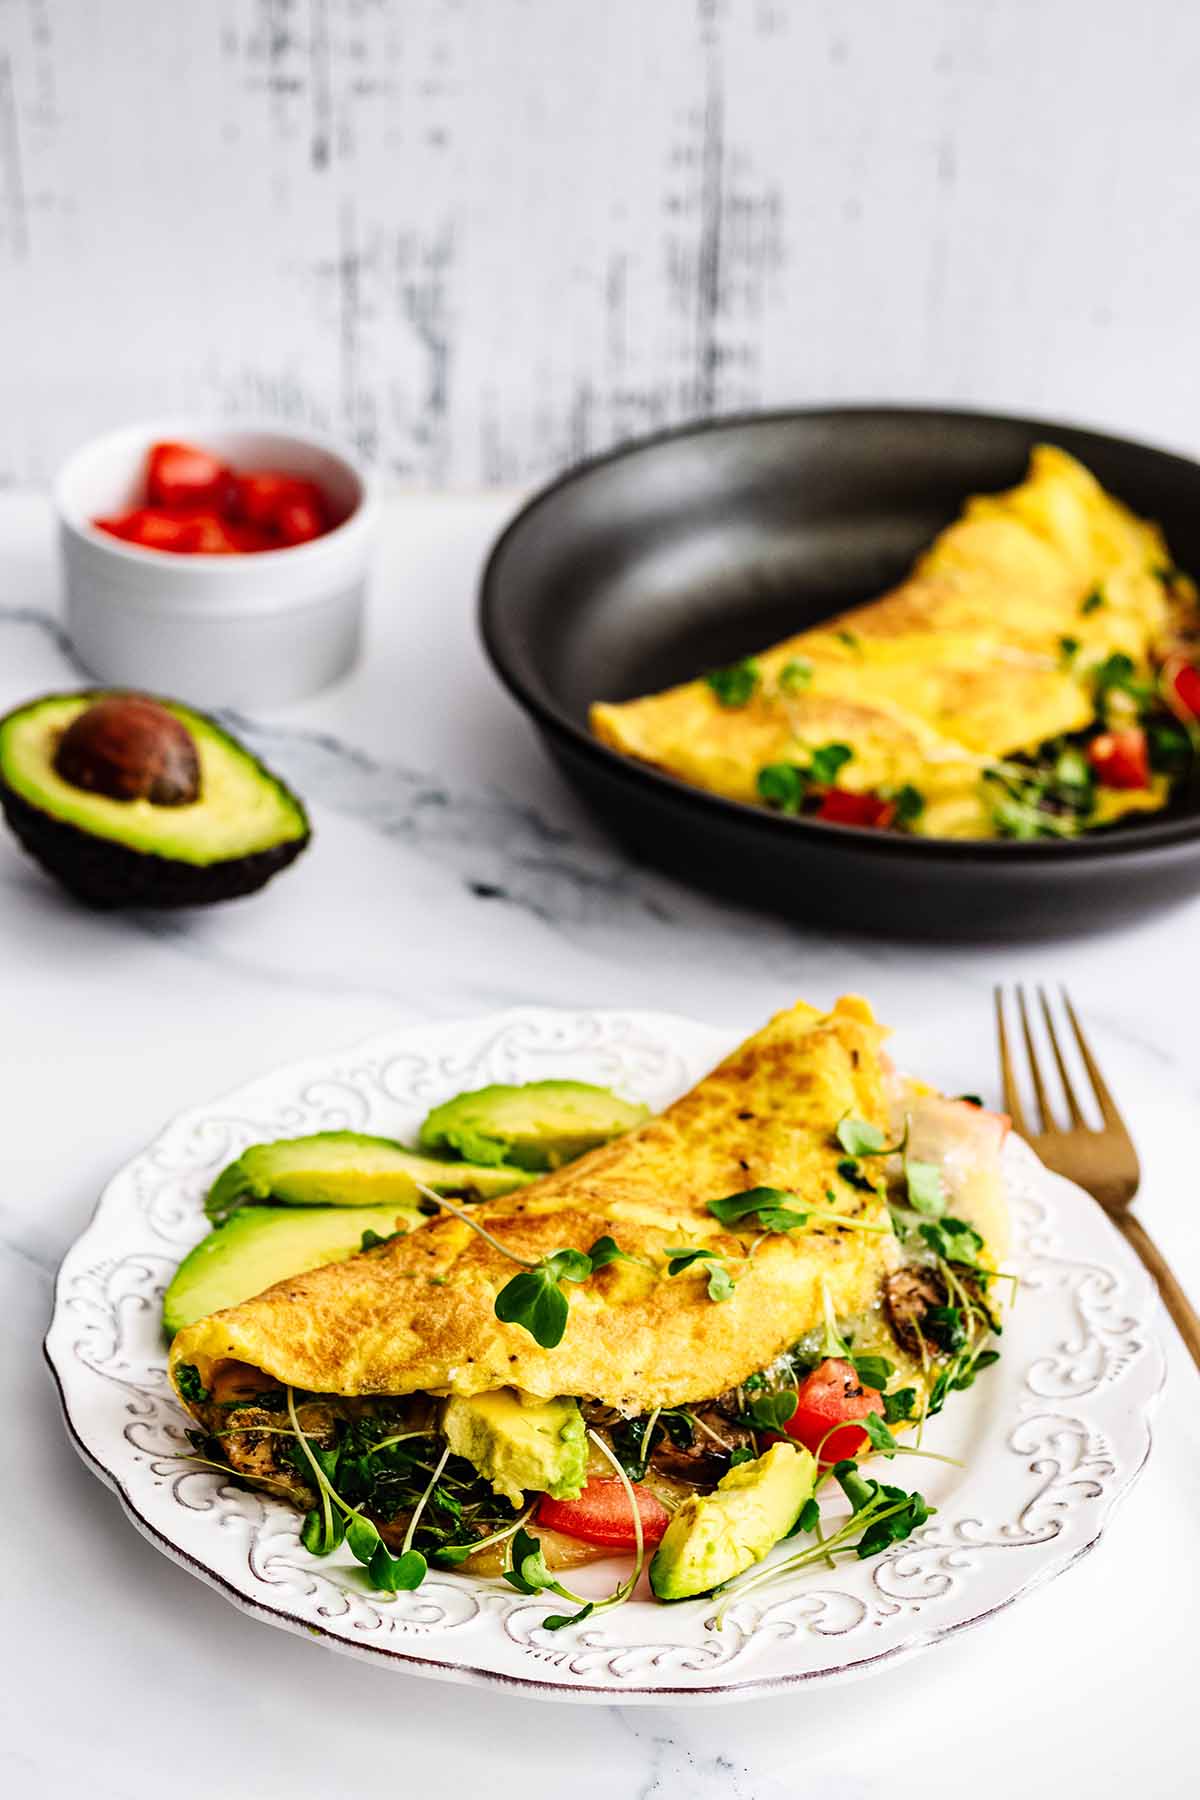 Loaded California omelette on a white plate with avocado slices and a gold fork. A second omelette is in a skillet int the background.